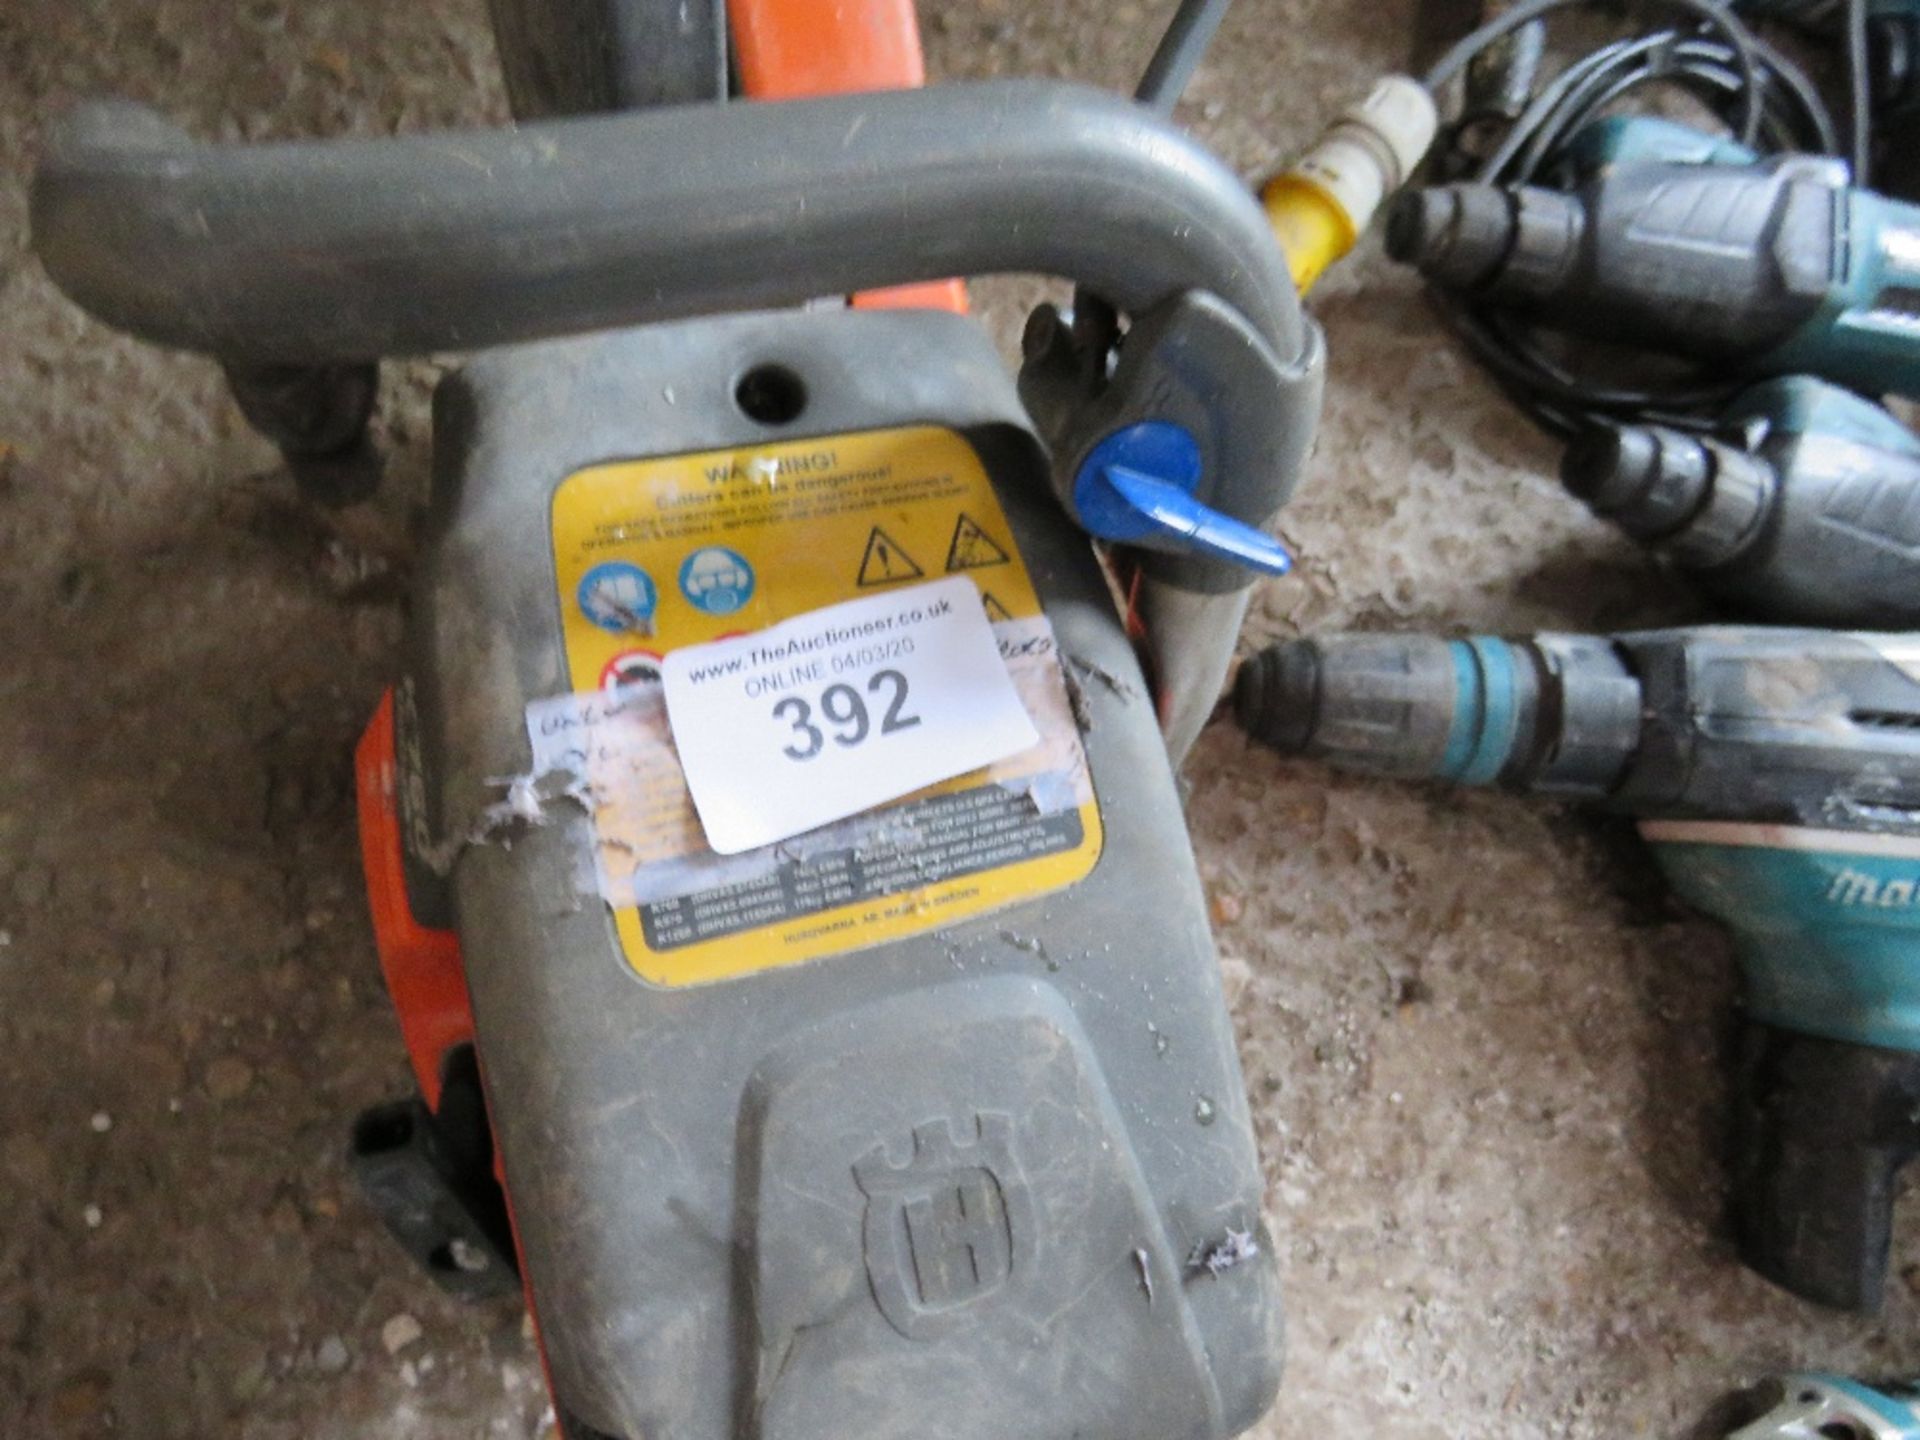 HUSQVARNA PETROL SAW CONDITION UNKNOWN, UNTESTED - Image 3 of 3